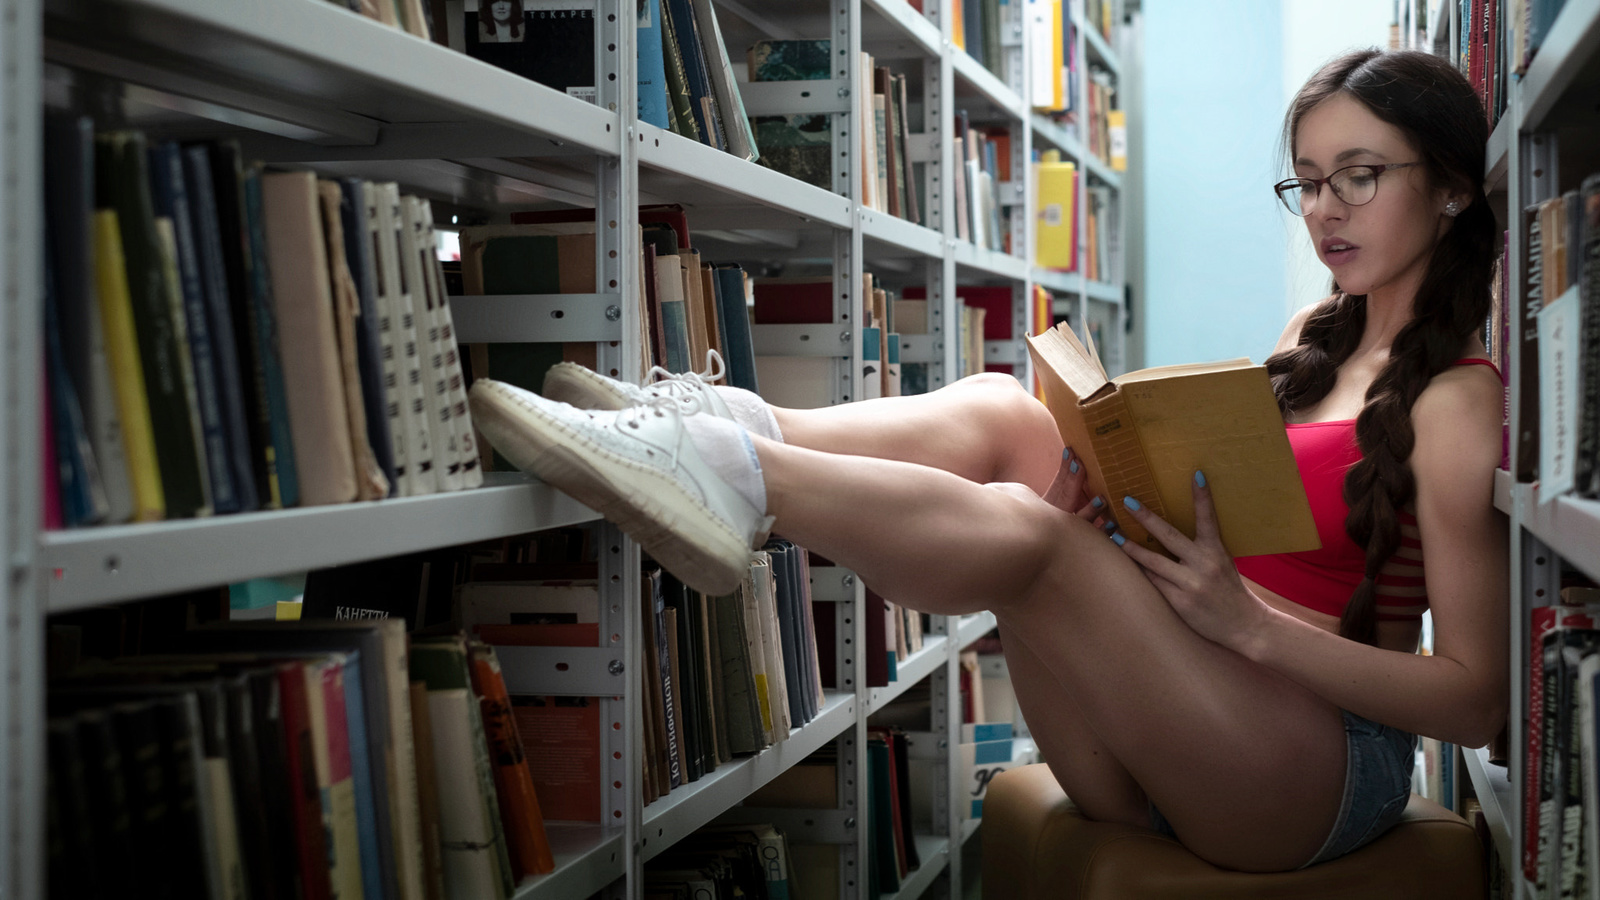 women, sitting, jean shorts, sneakers, books, pigtails, women with glasses, white socks, painted nails